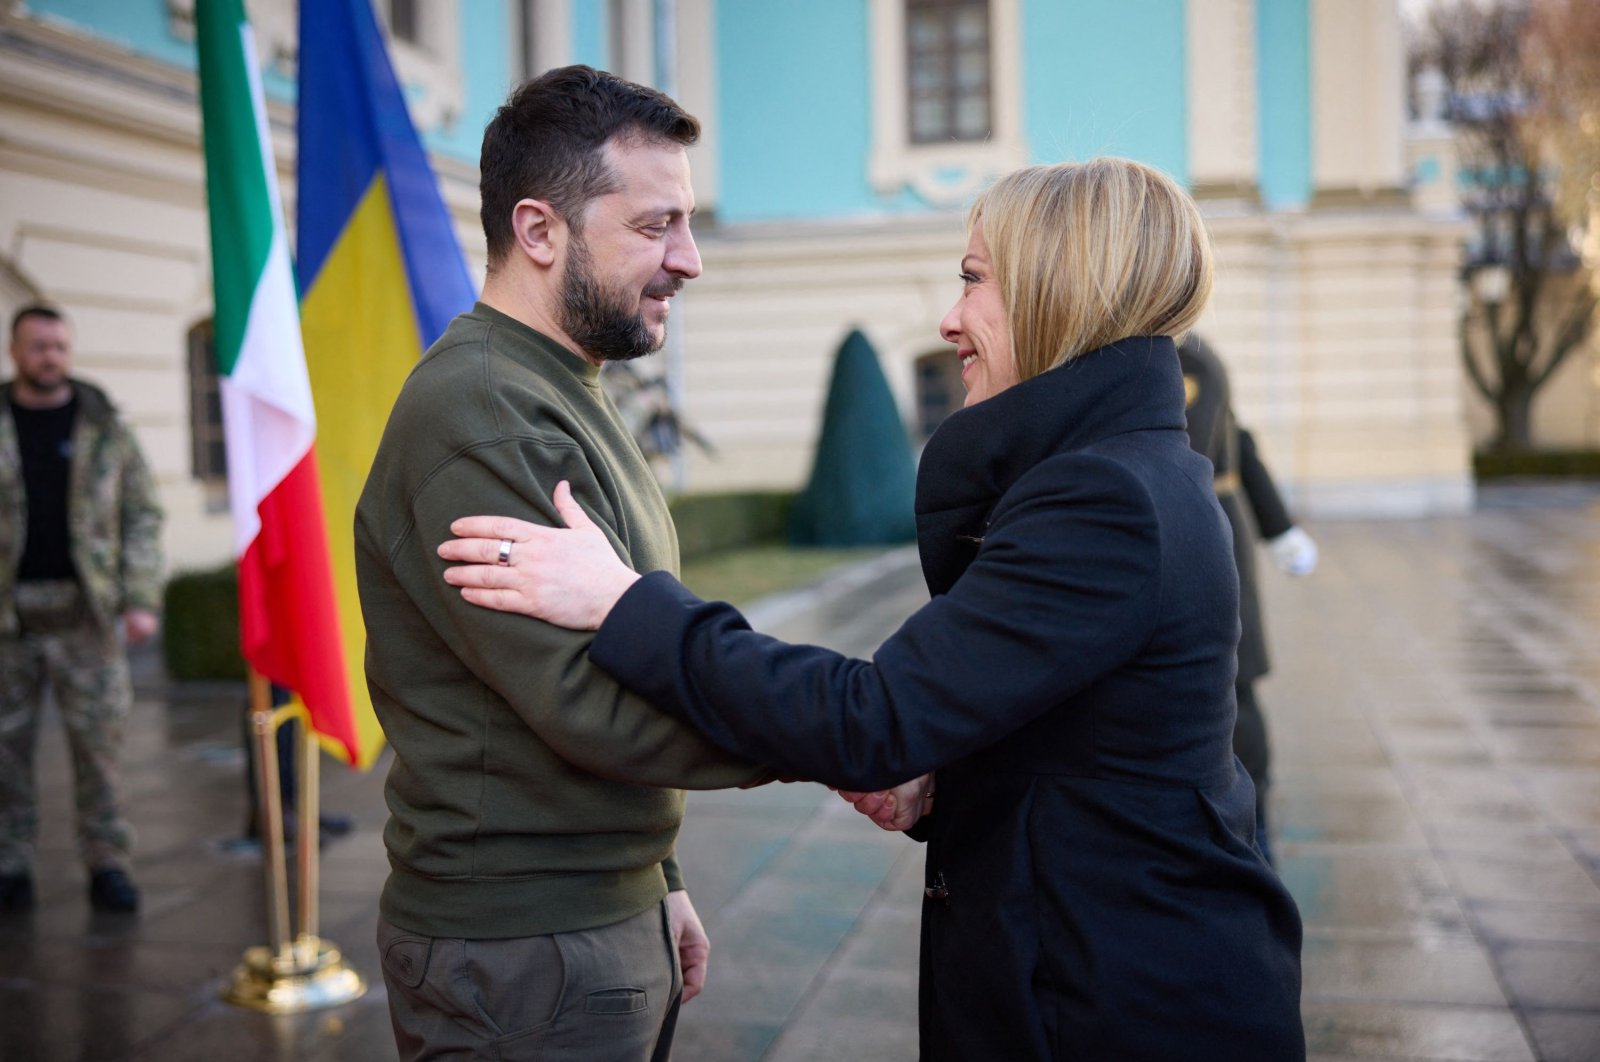 Meloni reiterates Italy’s support for Ukraine during trip to Kyiv